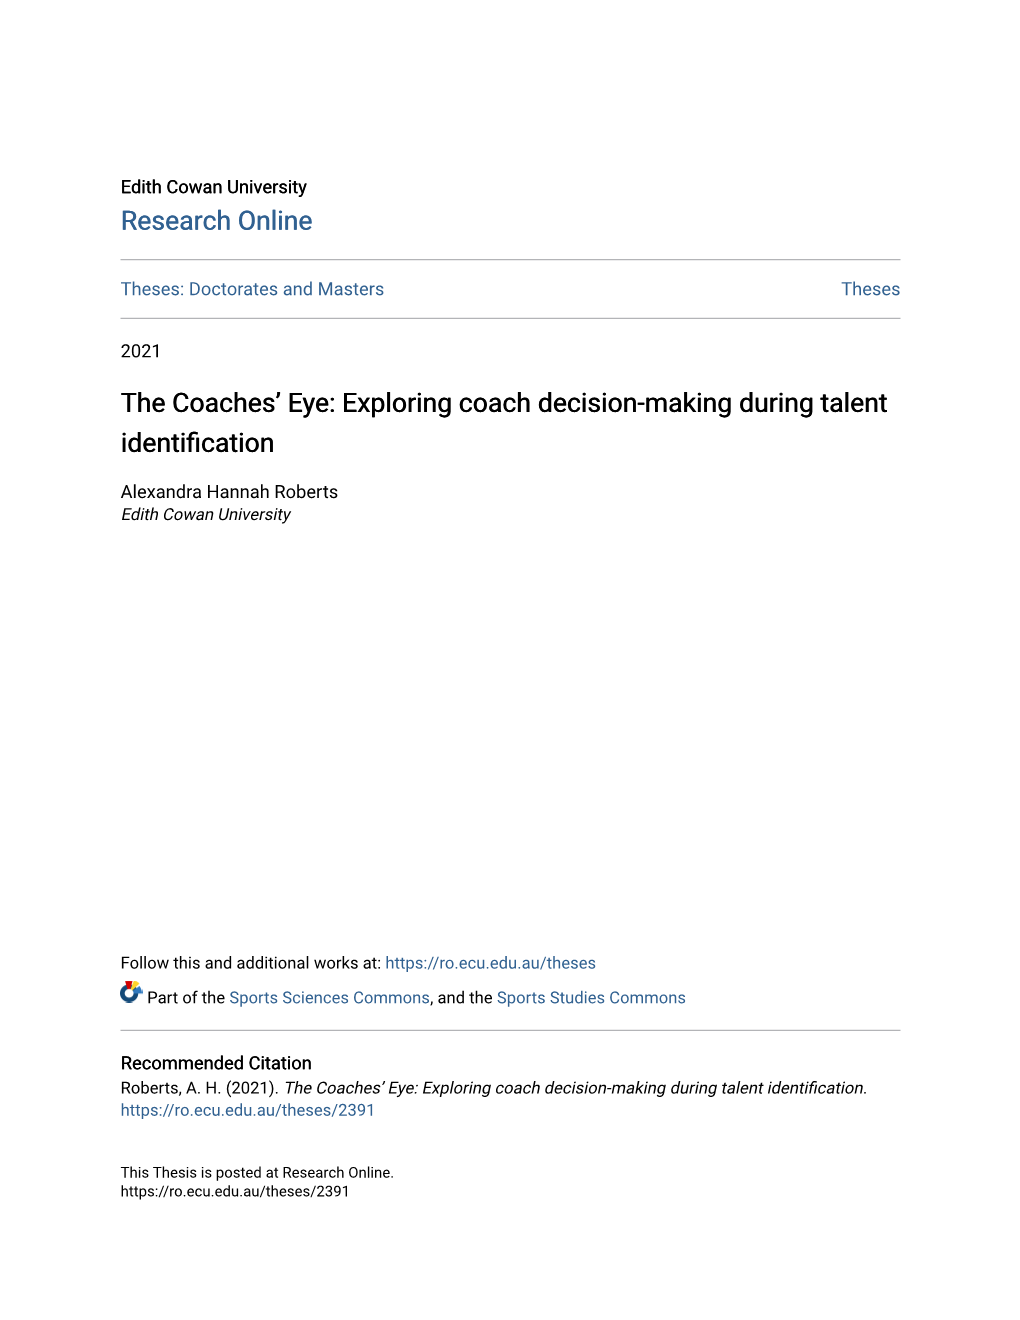 Exploring Coach Decision-Making During Talent Identification